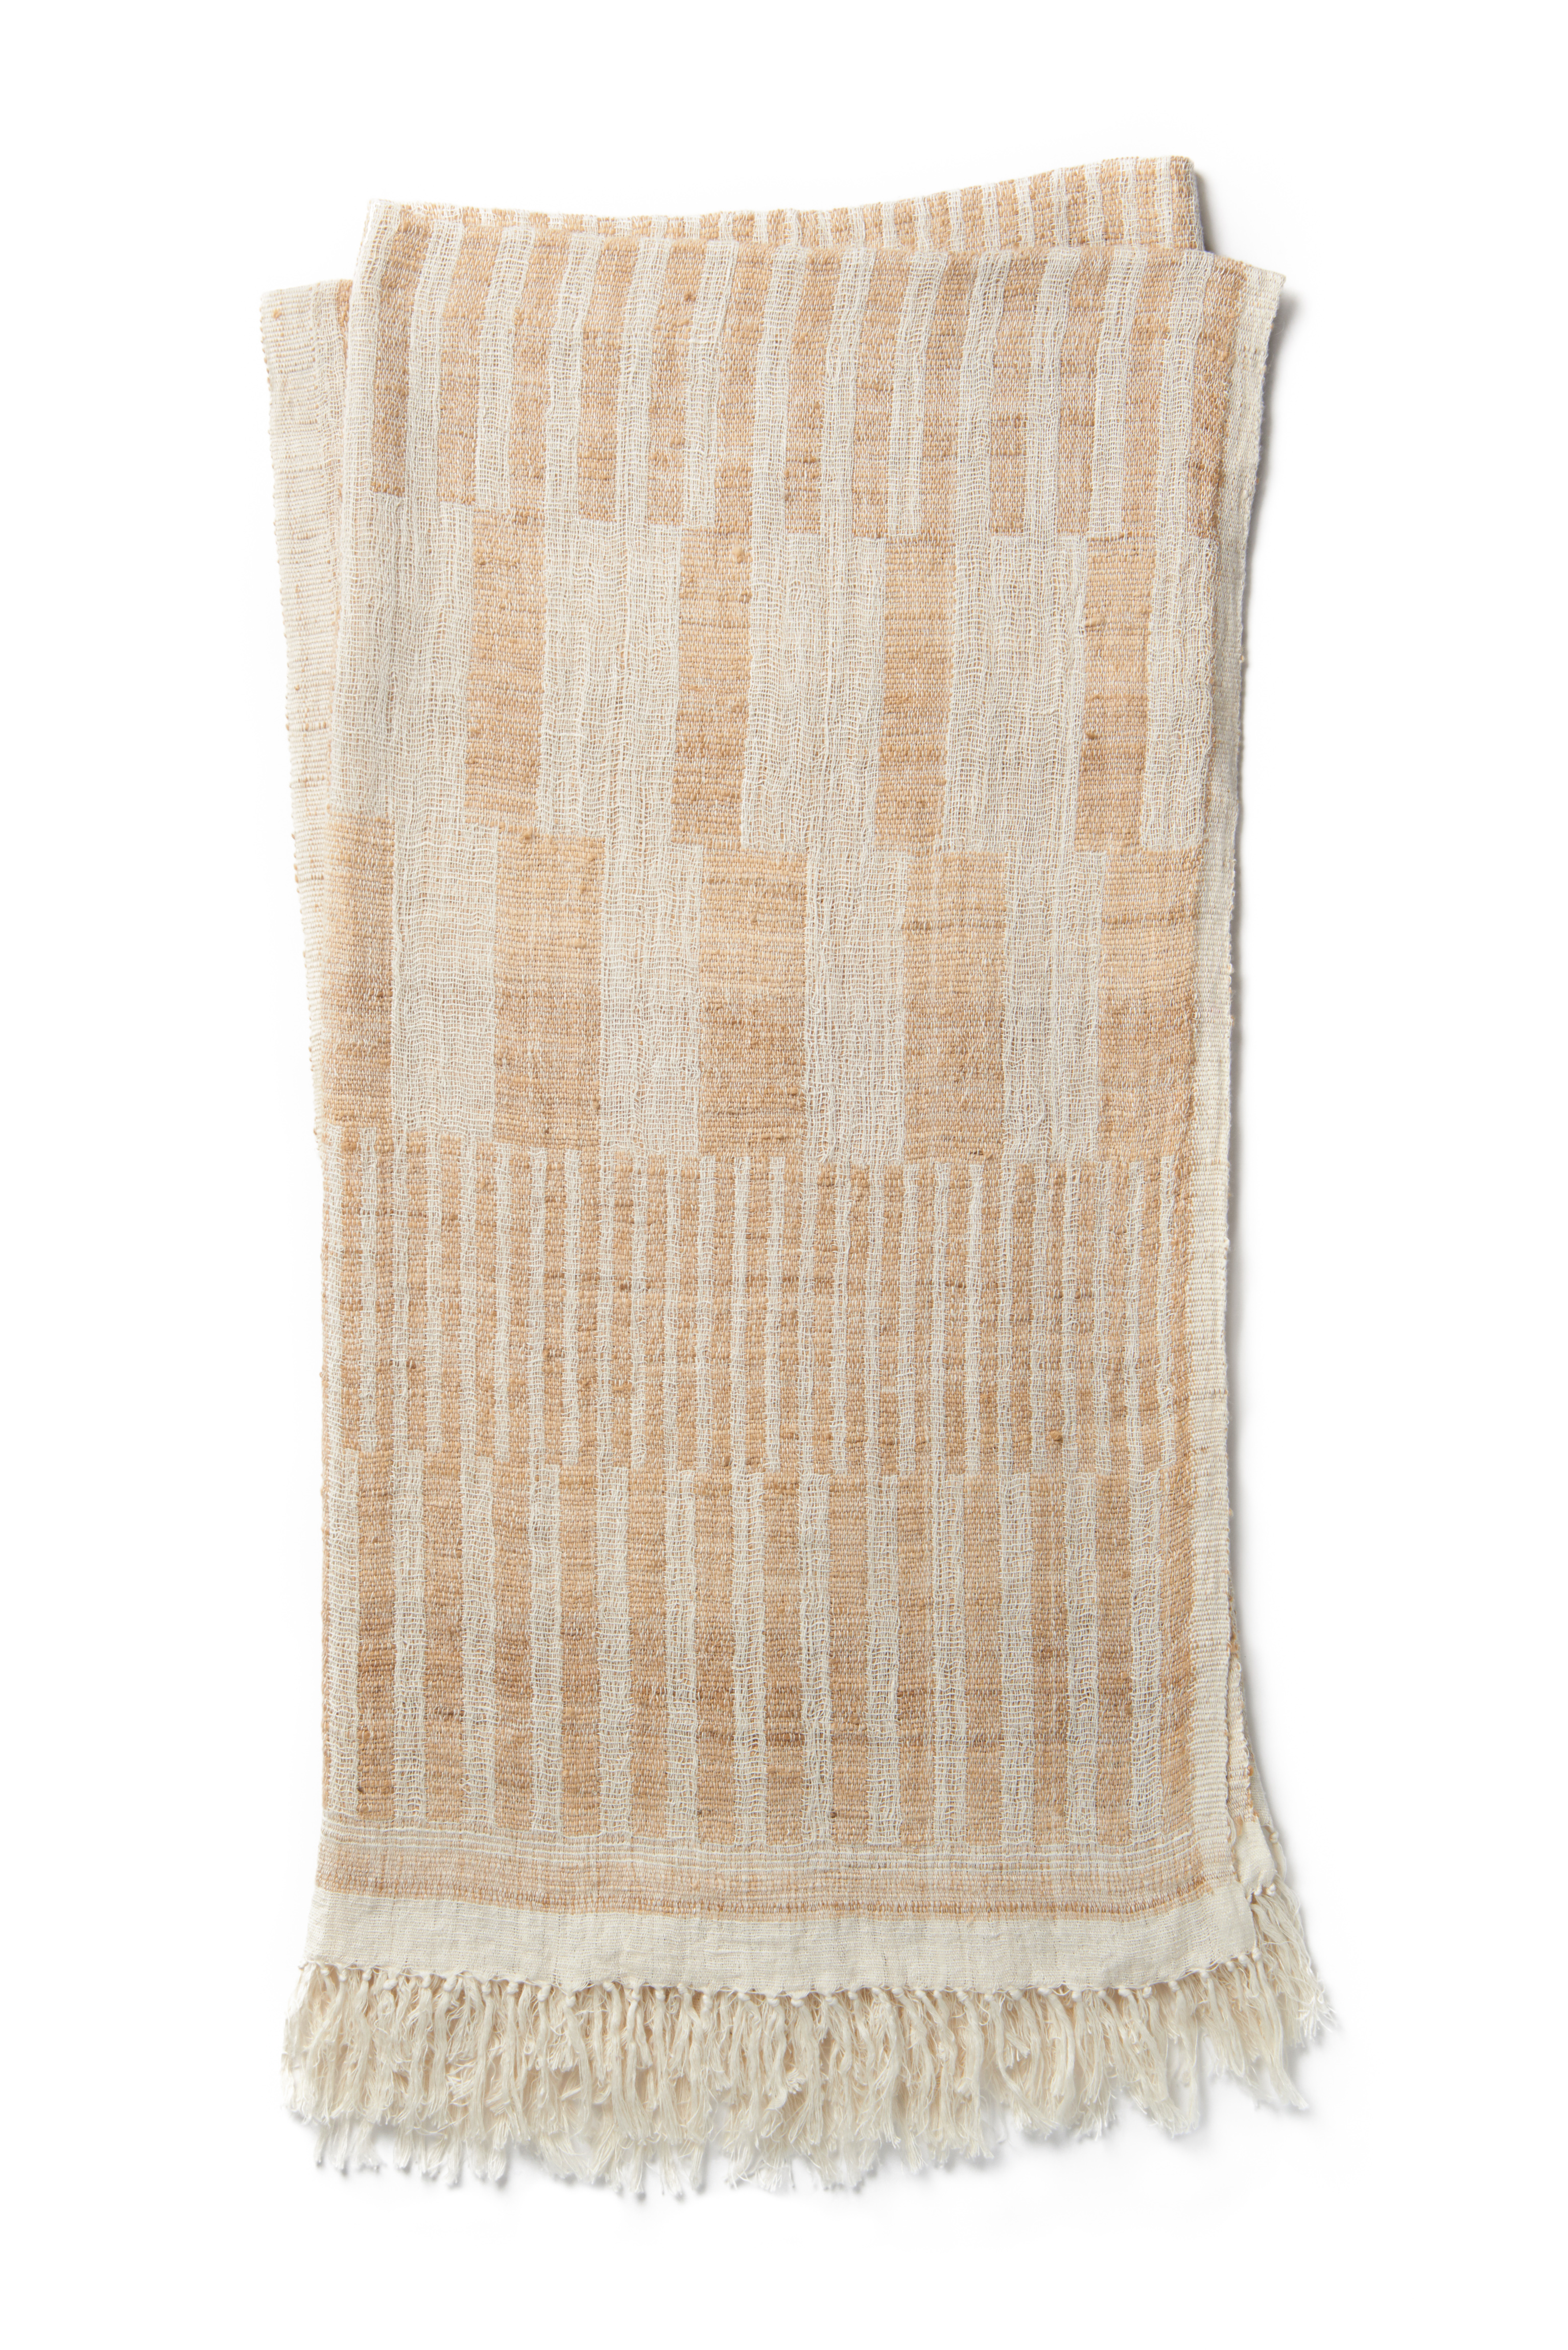 All Roads Yucca Throw Blanket - Anthropologie | Havenly